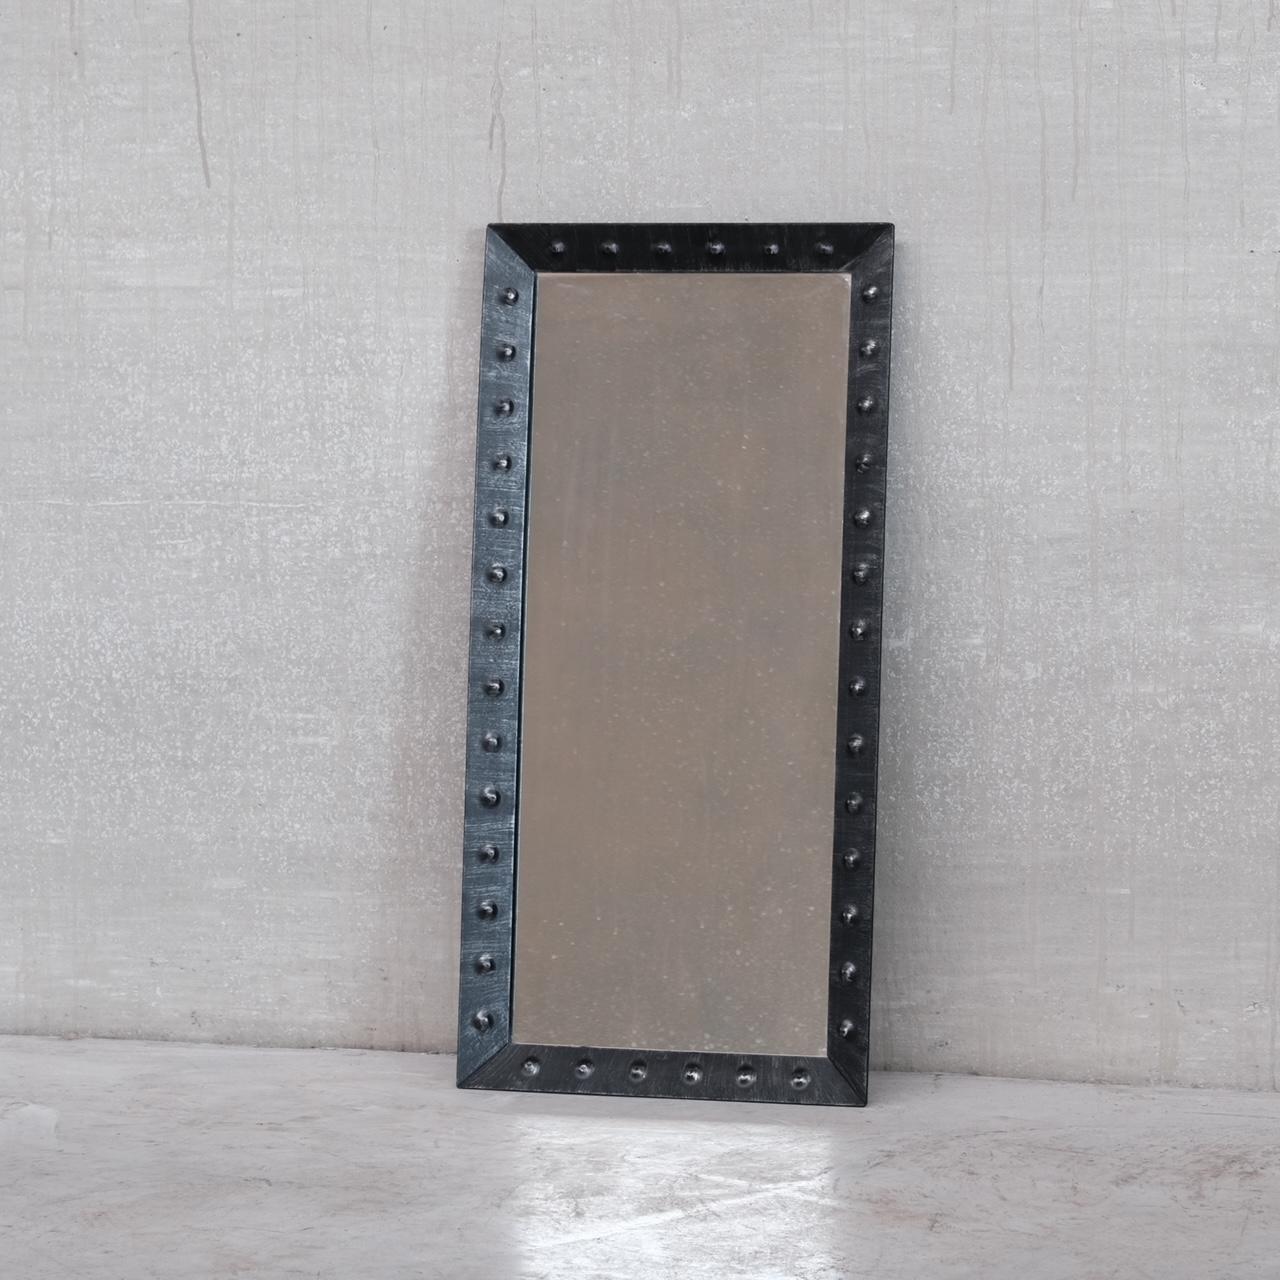 A good looking brutalist style mirror. 

Belgium, c1980s. 

Iron surround. 

Good condition generally, some scuffs and wear commensurate with age. 

Location: Belgium Gallery. 

Dimensions: 85 H x 42 W x 4 D in cm. 

Delivery: POA

We